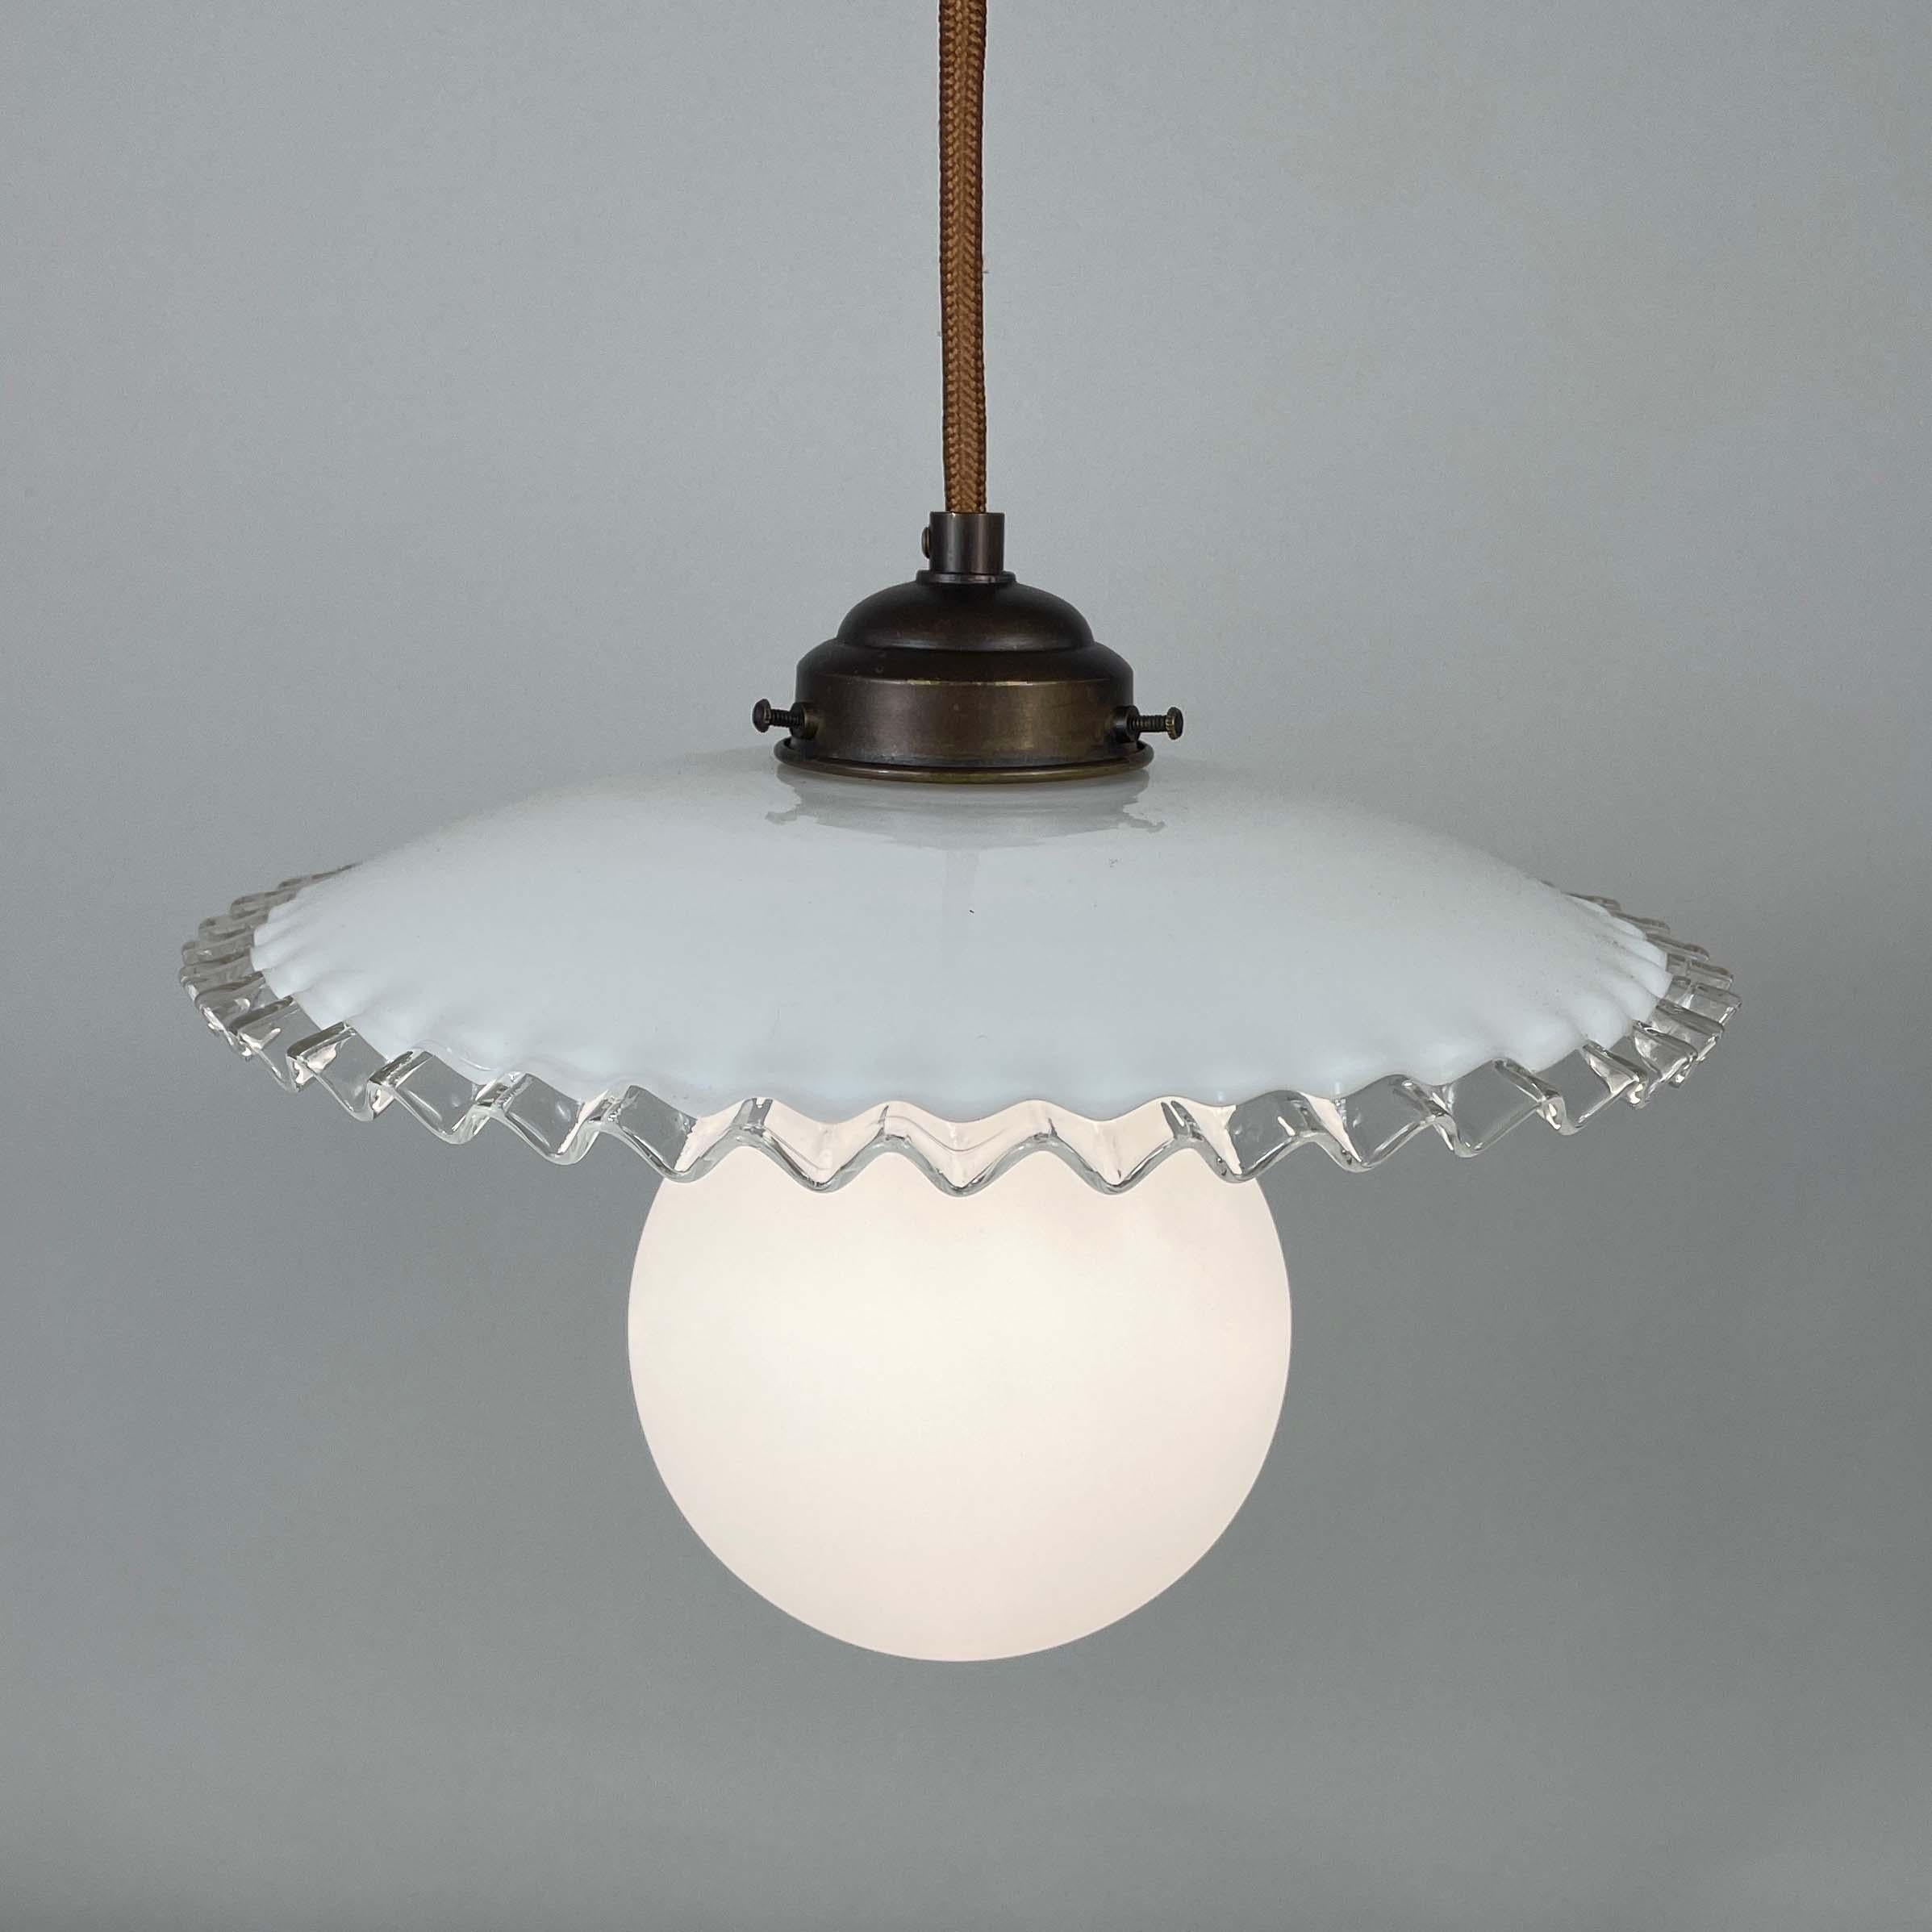 Midcentury French Opaline Glass Pendant Light, 1950s For Sale 4